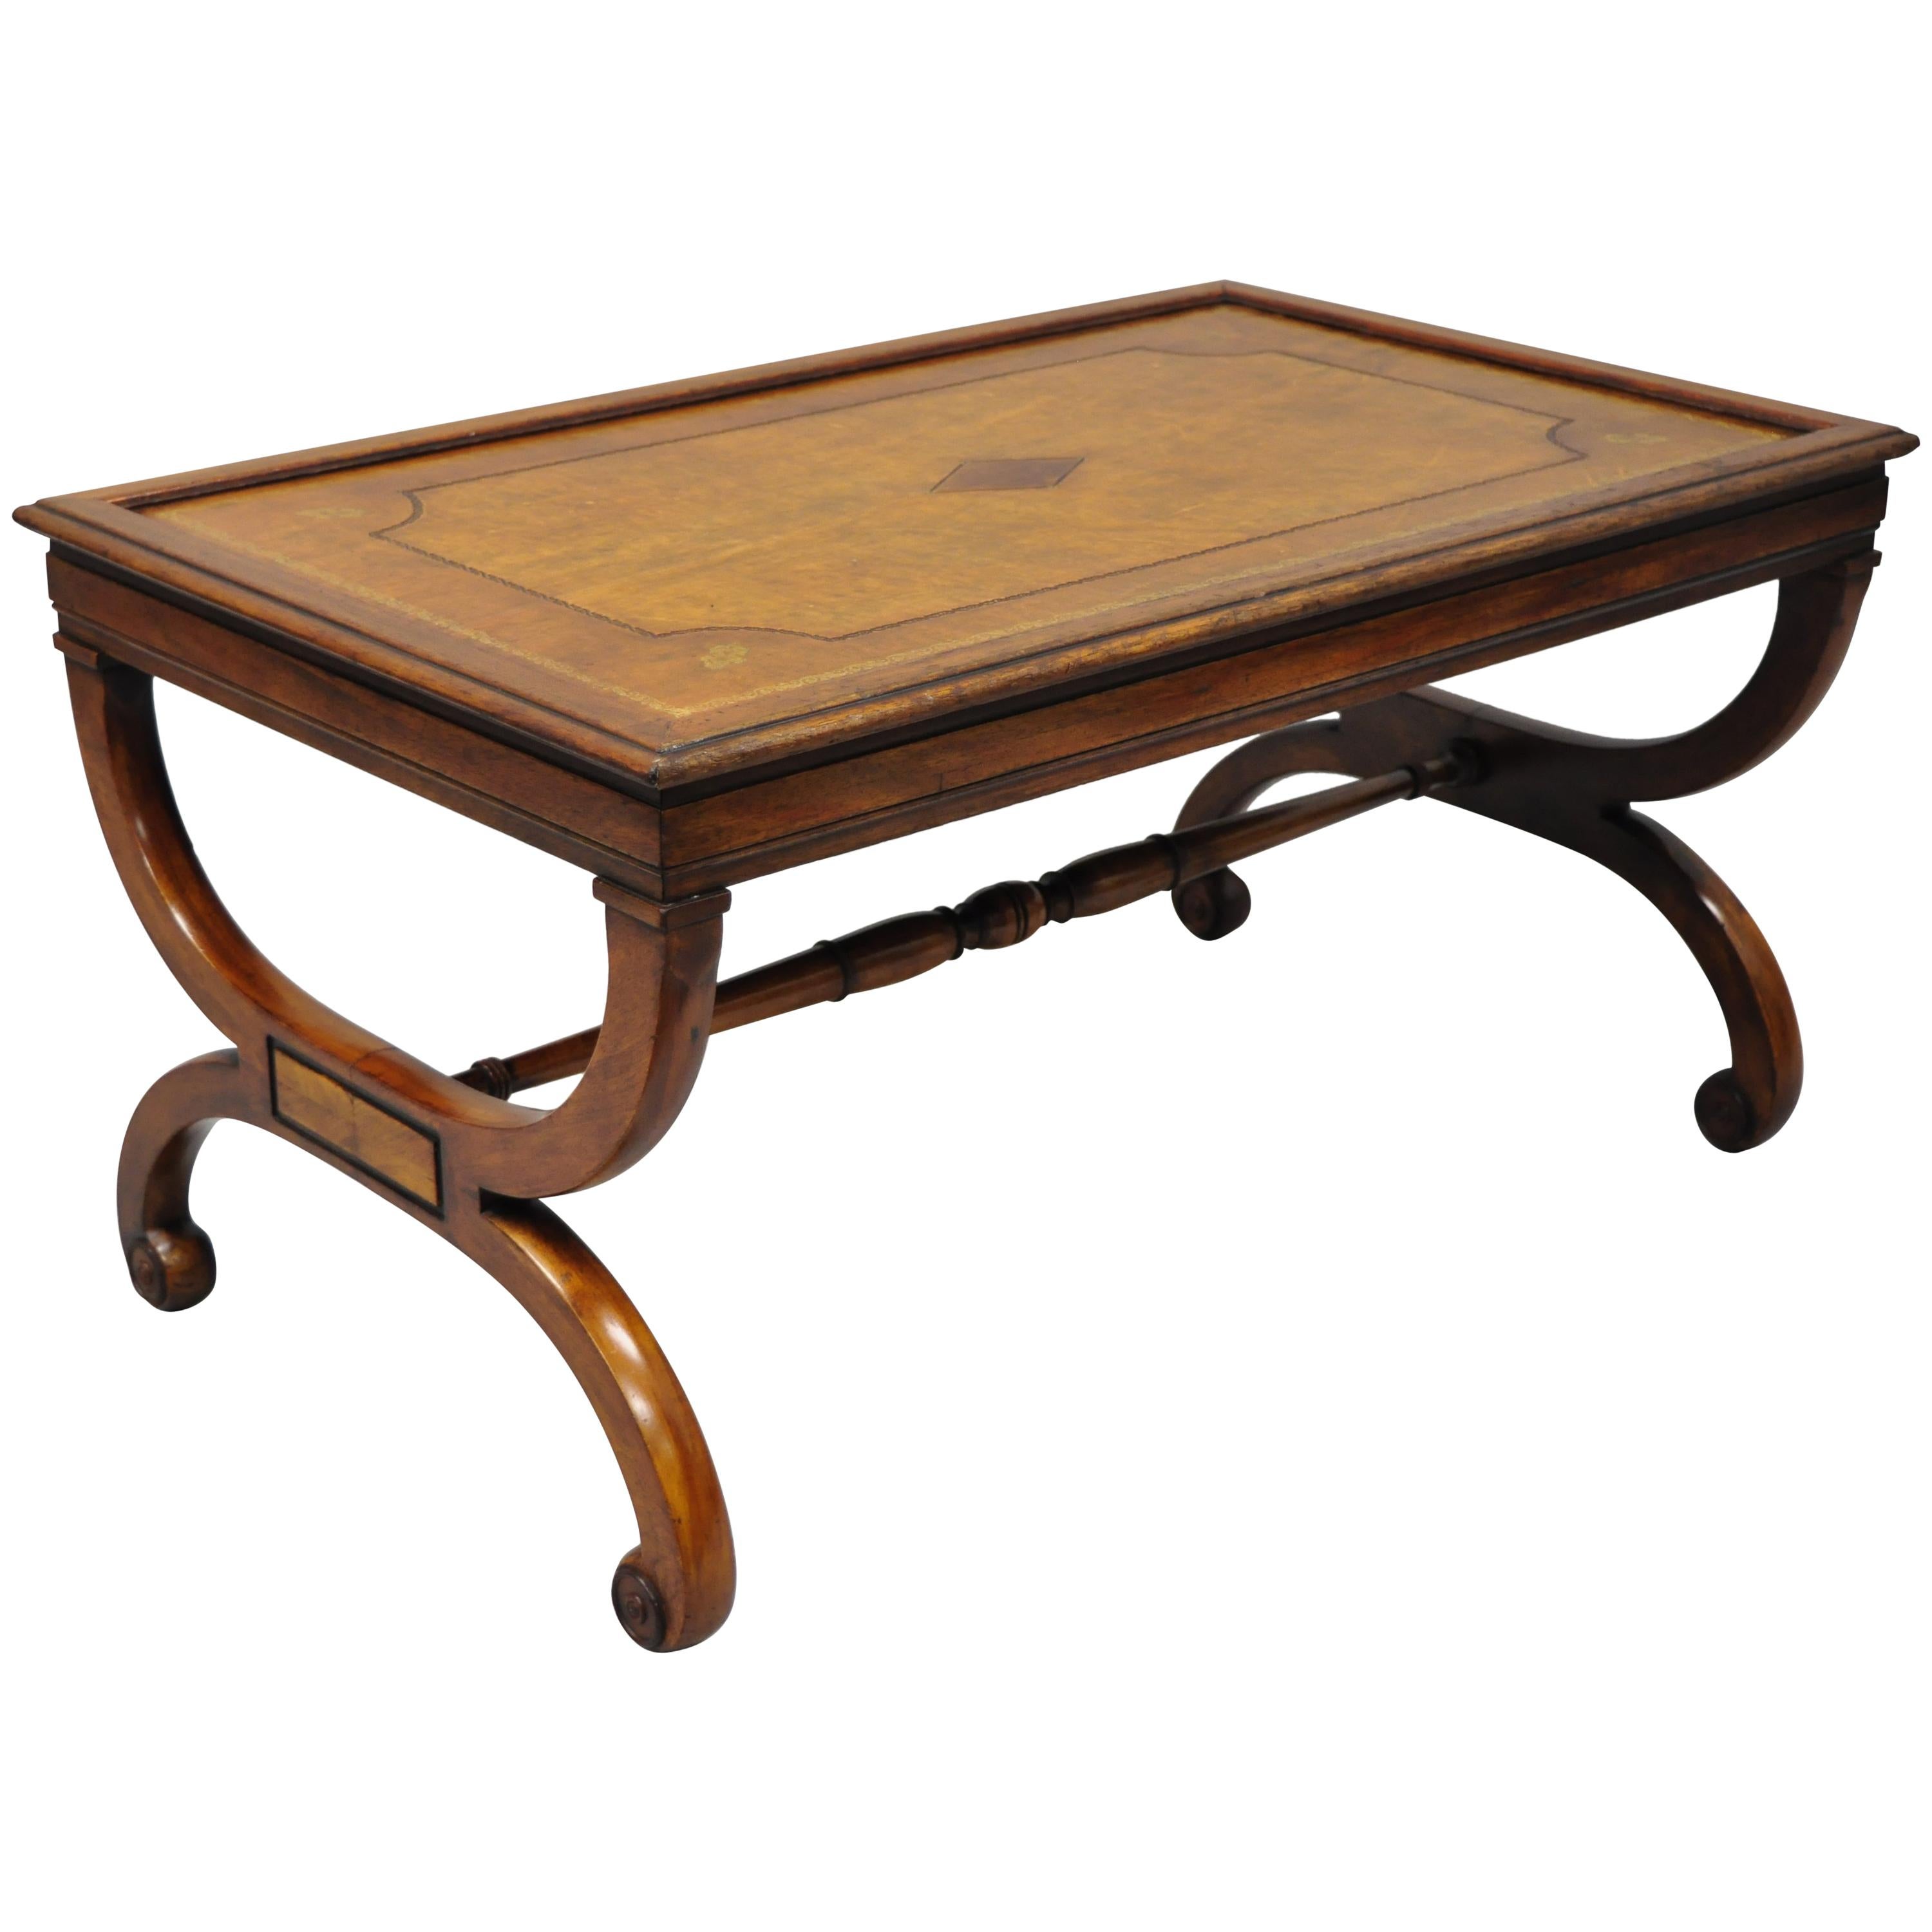 English Regency Style Brown Tooled Leather Top Curule Base Mahogany Coffee Table